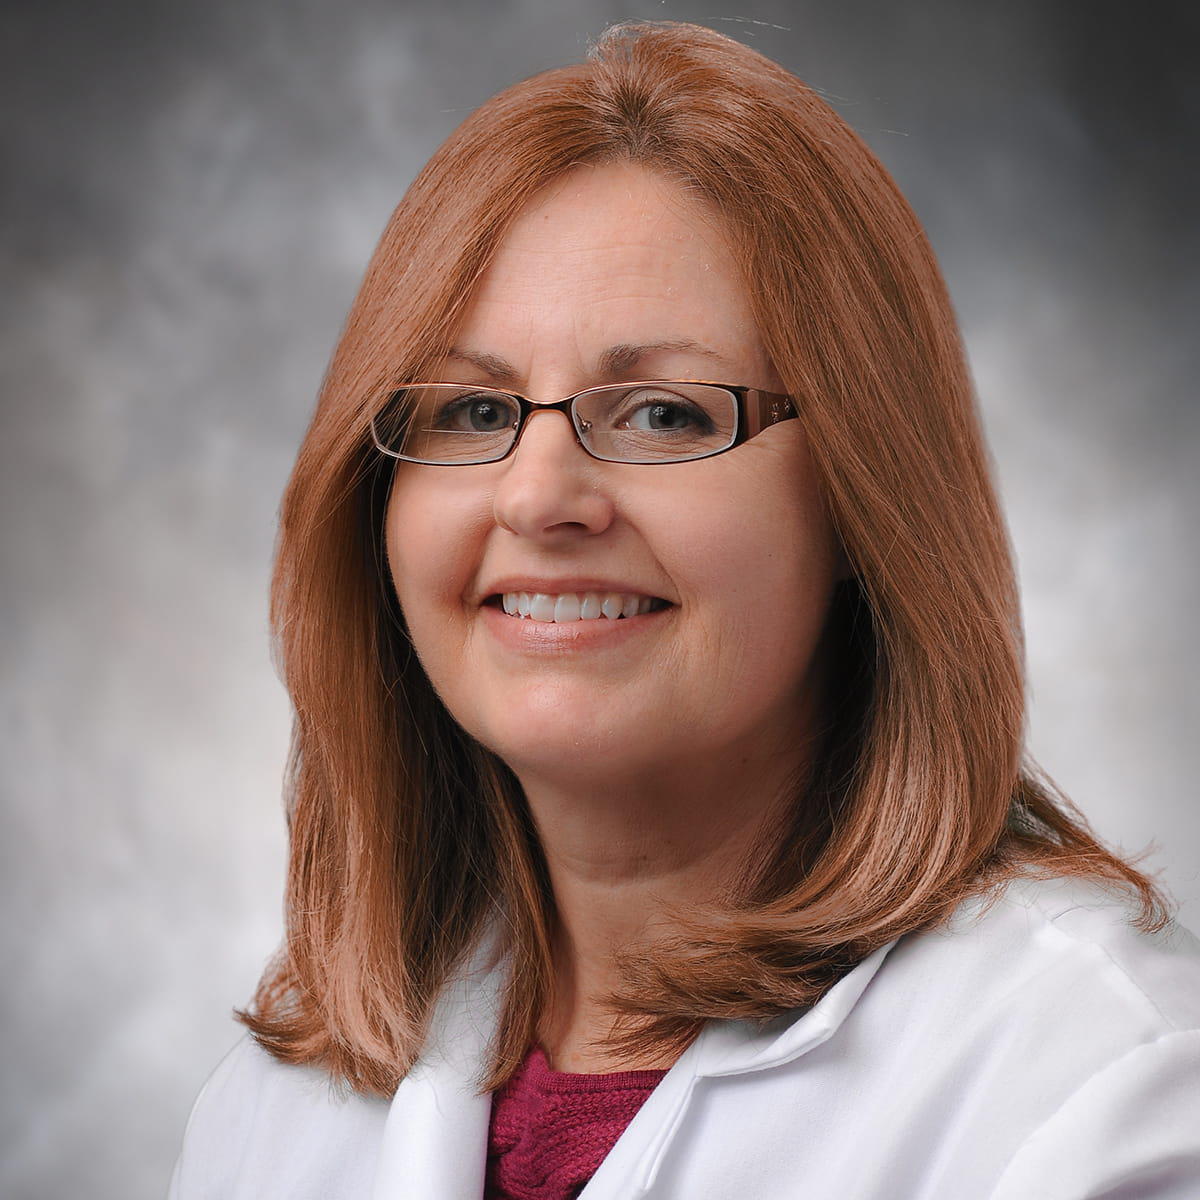 Dr. Laurie Maughon Lammert